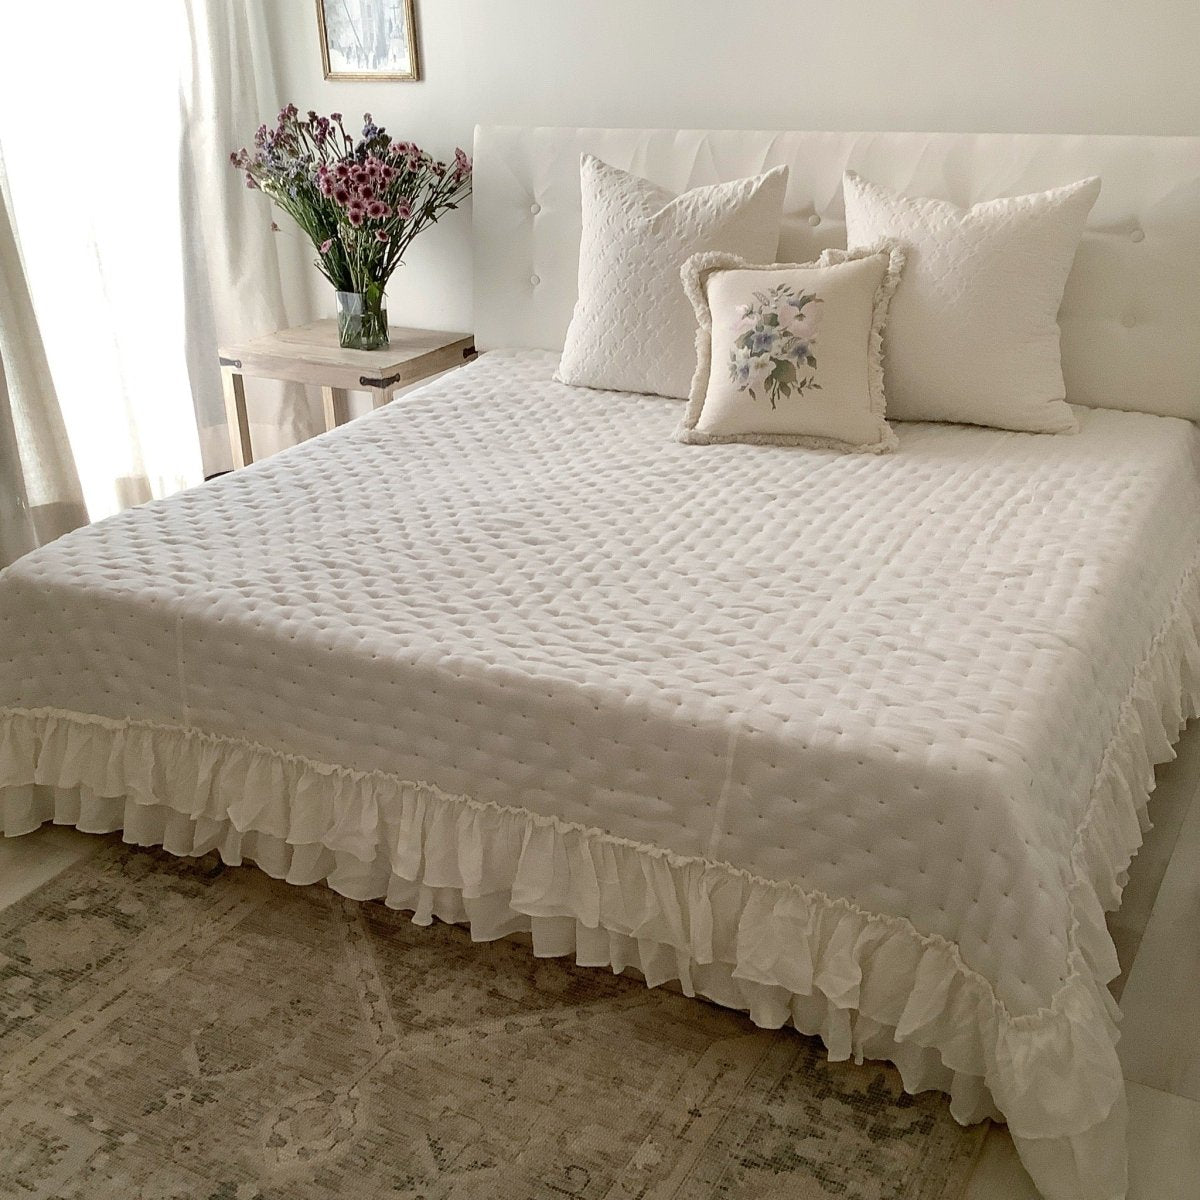 Emilia - An Enchanting Ruffled Bedspread - Comes with Two Pillowcases - Studio Covers